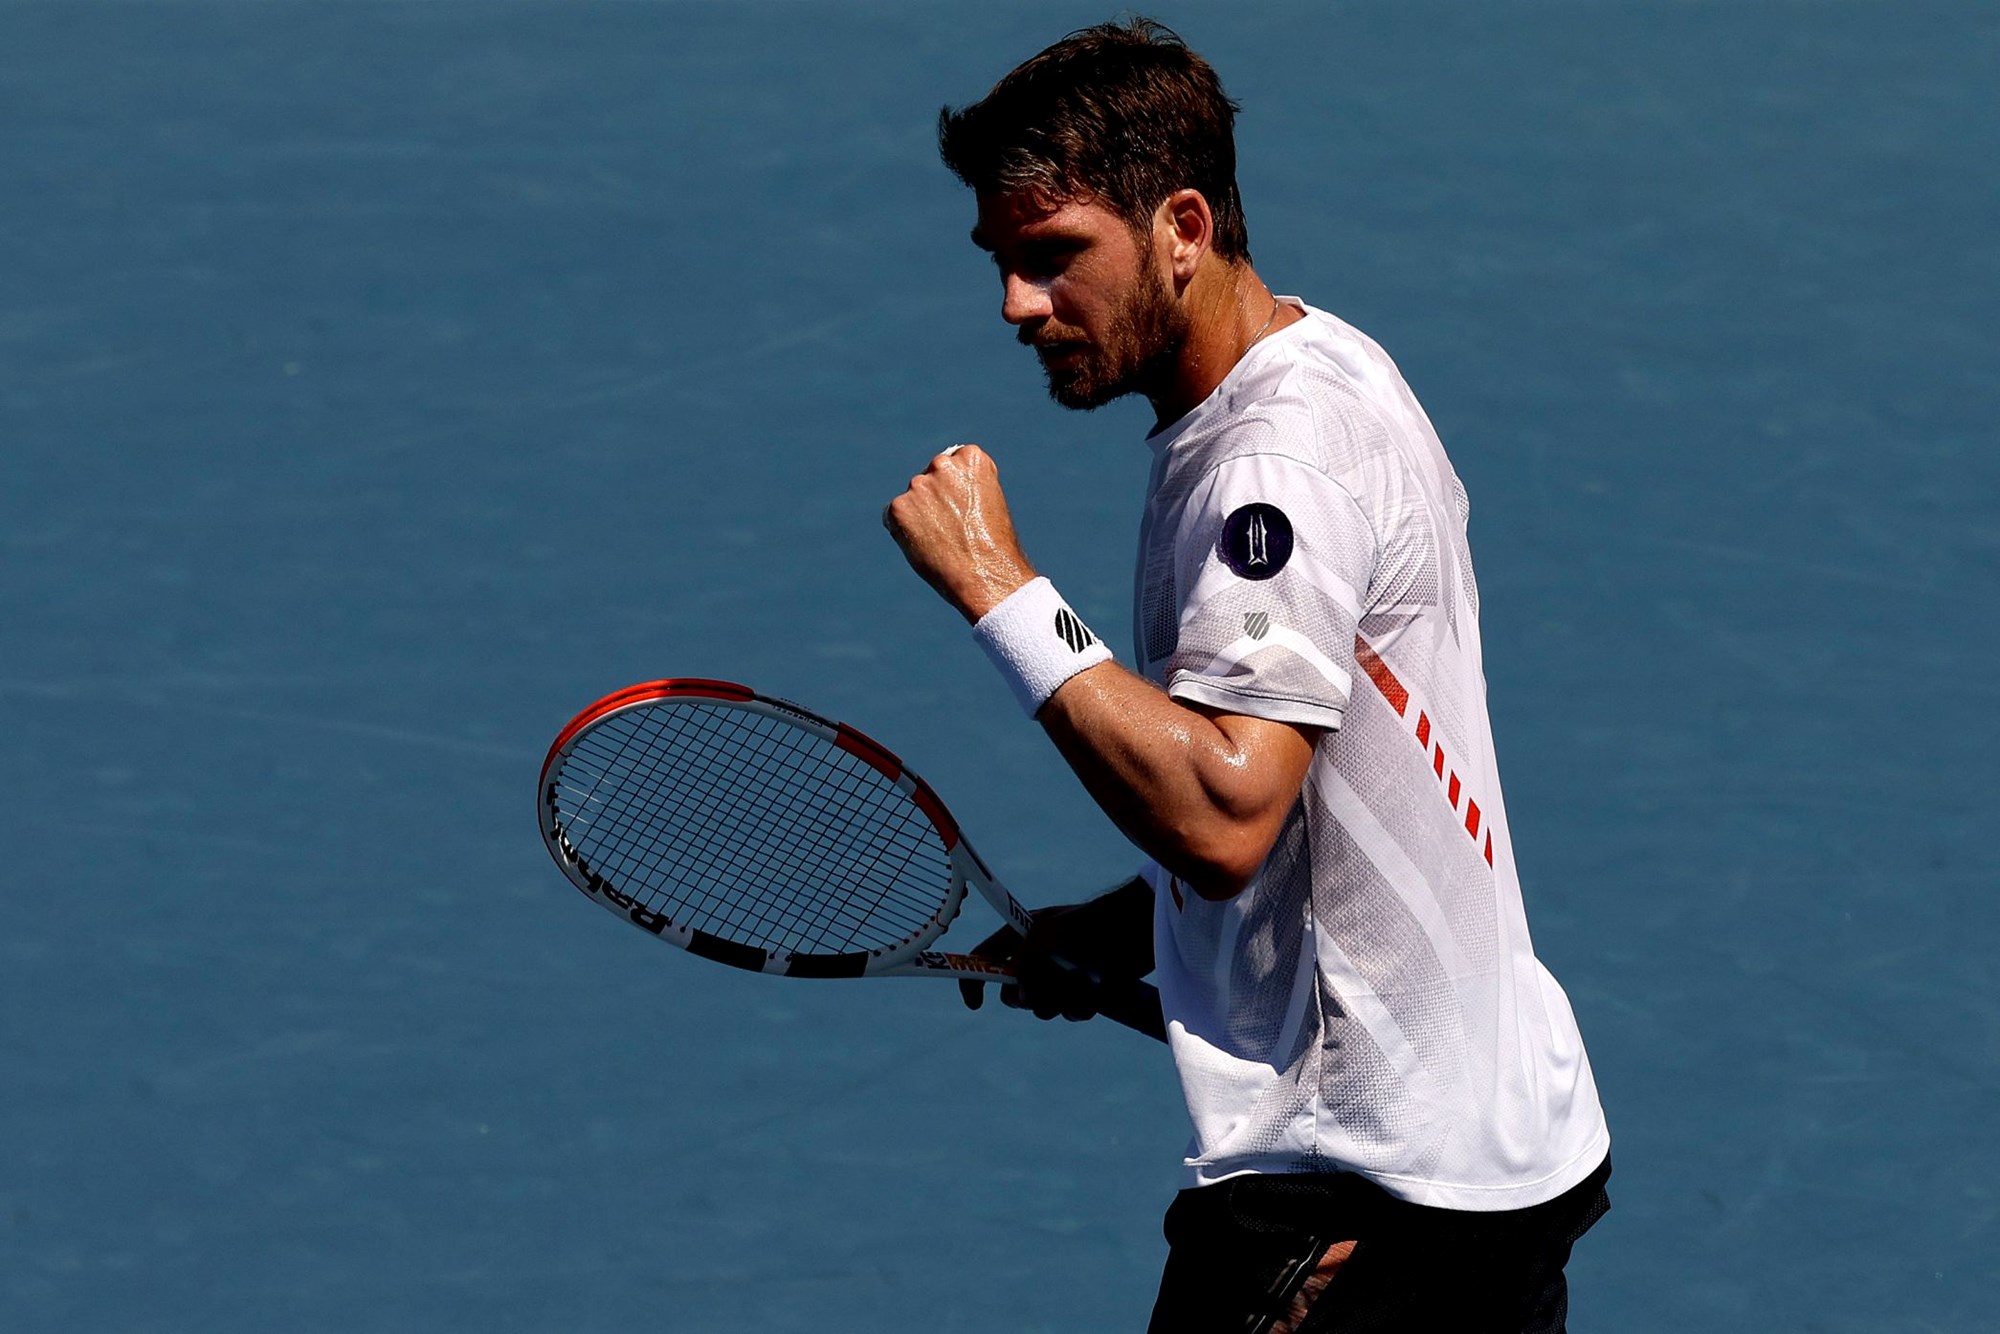 Cam Norrie celebrates with a fist pump in the third round of the Miami Open 2022